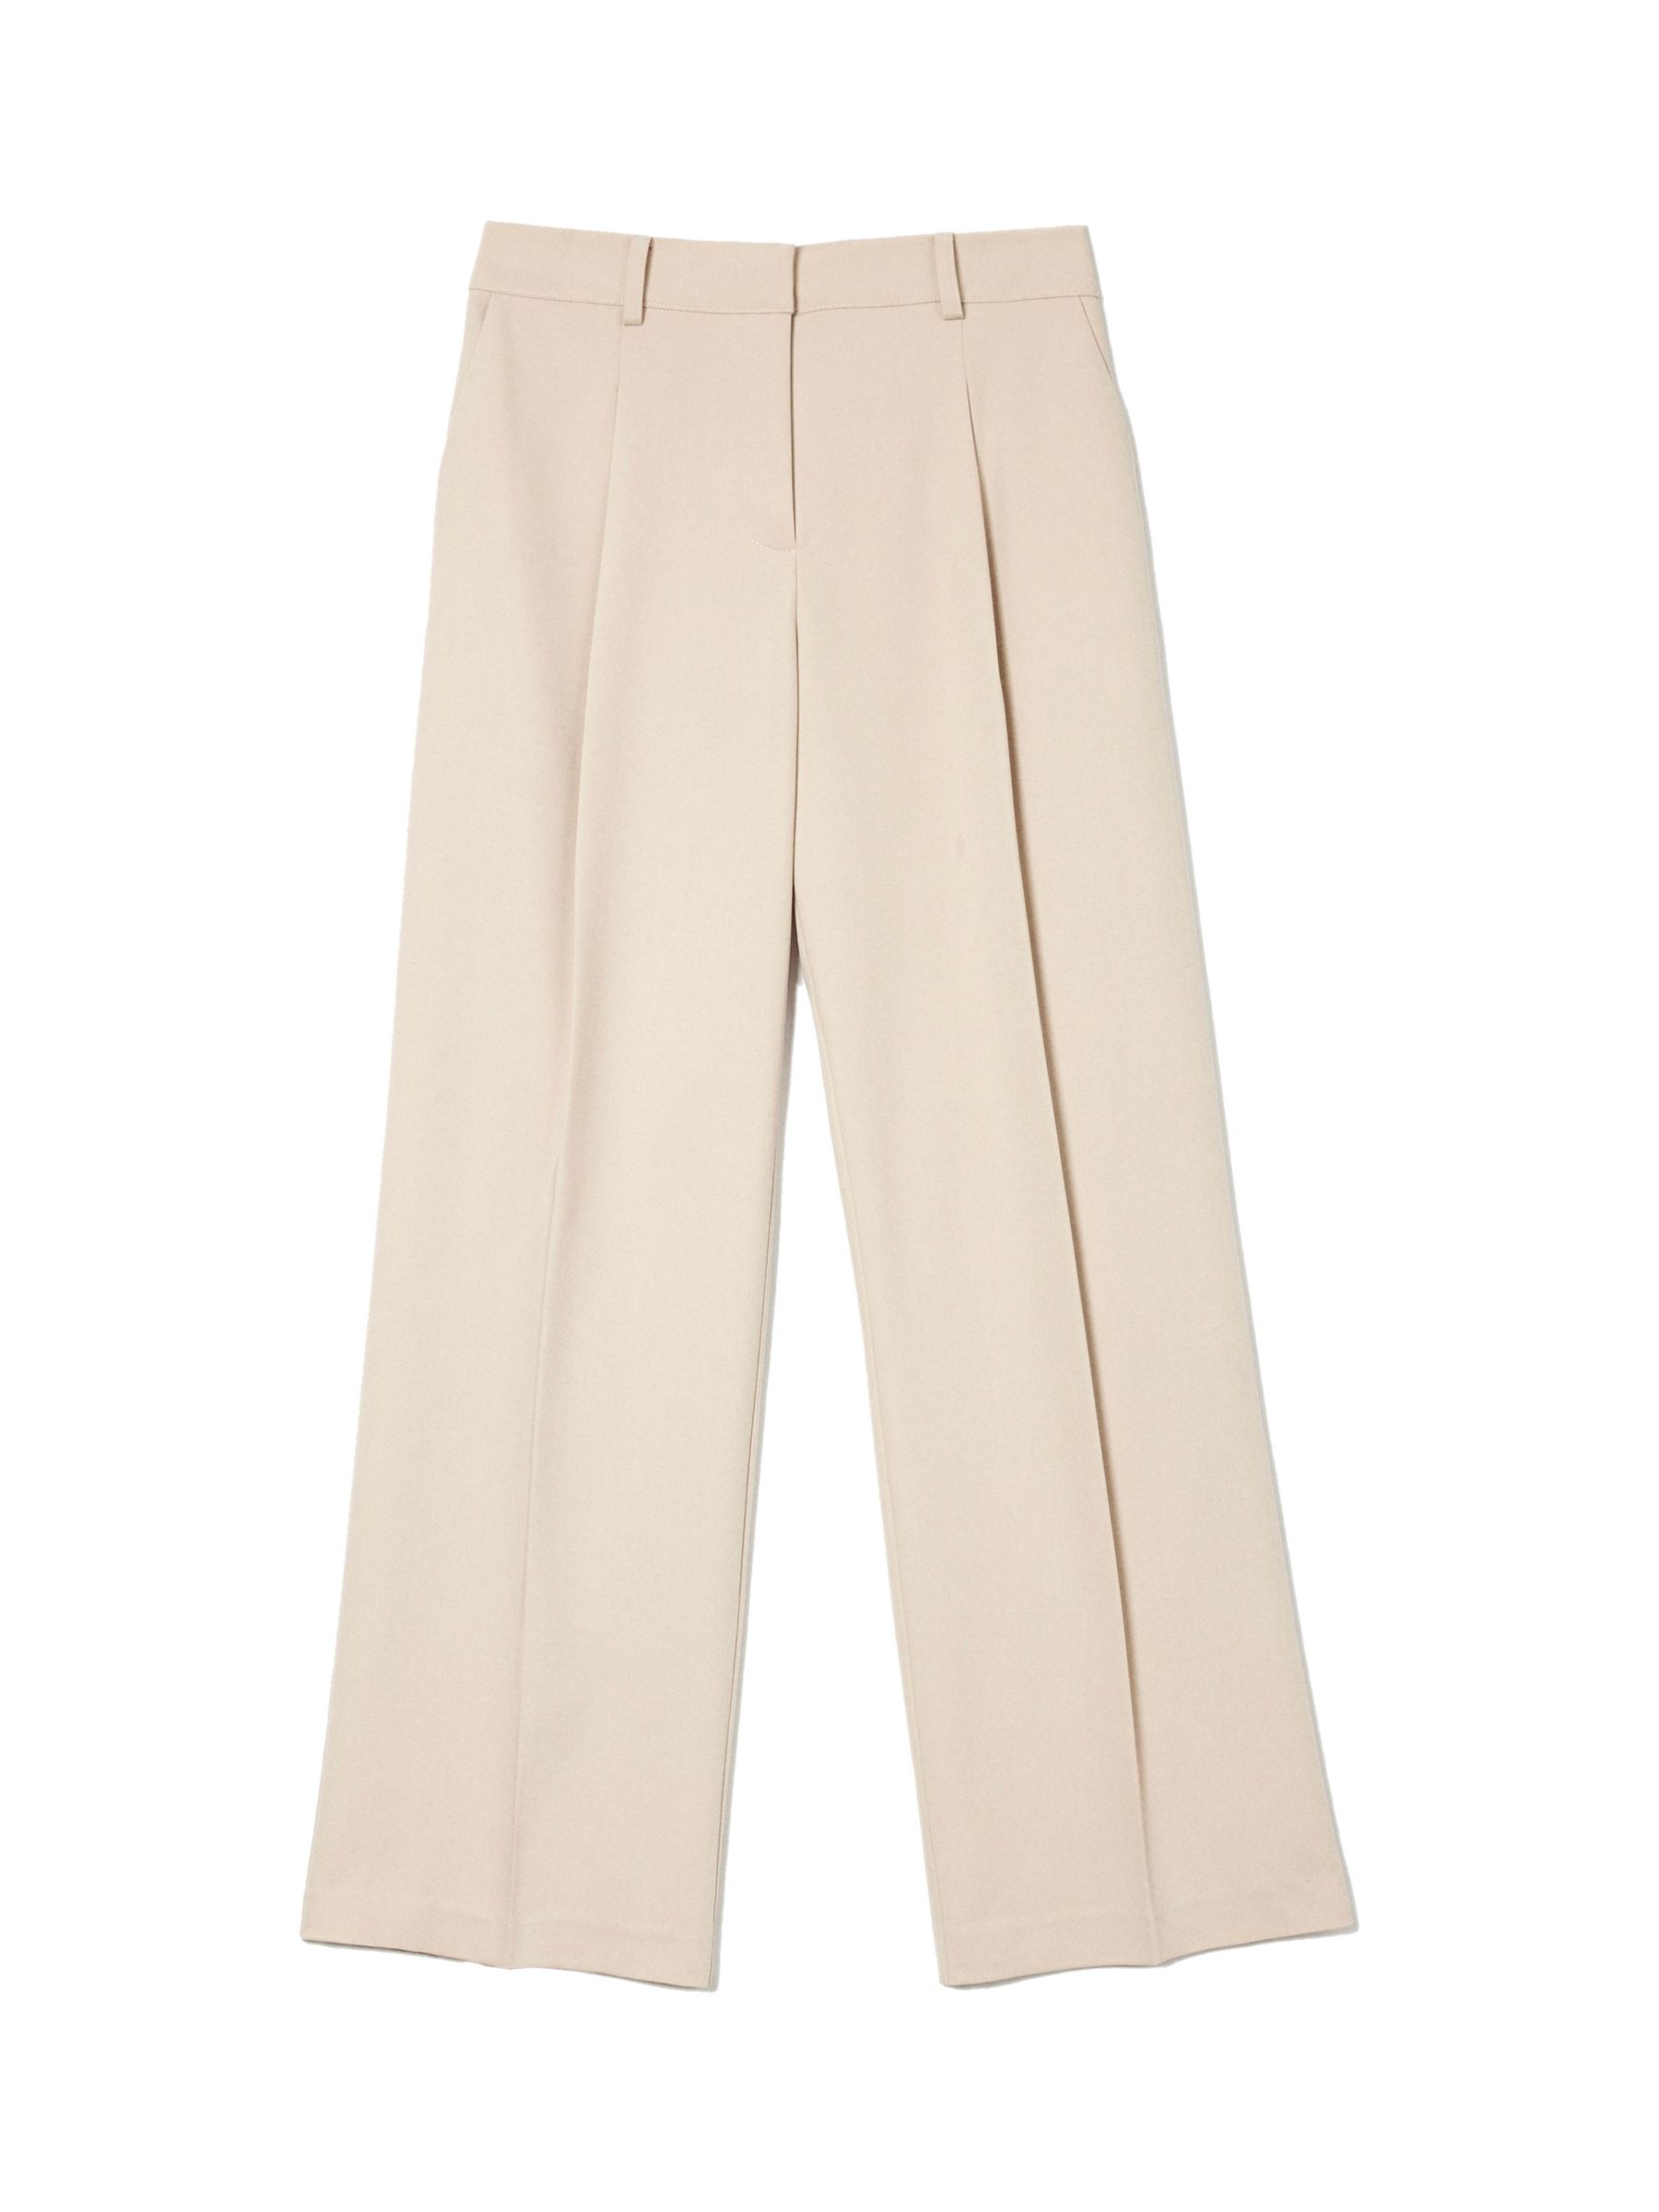 Albaray Pleat Front Tailored Trousers, Stone at John Lewis & Partners